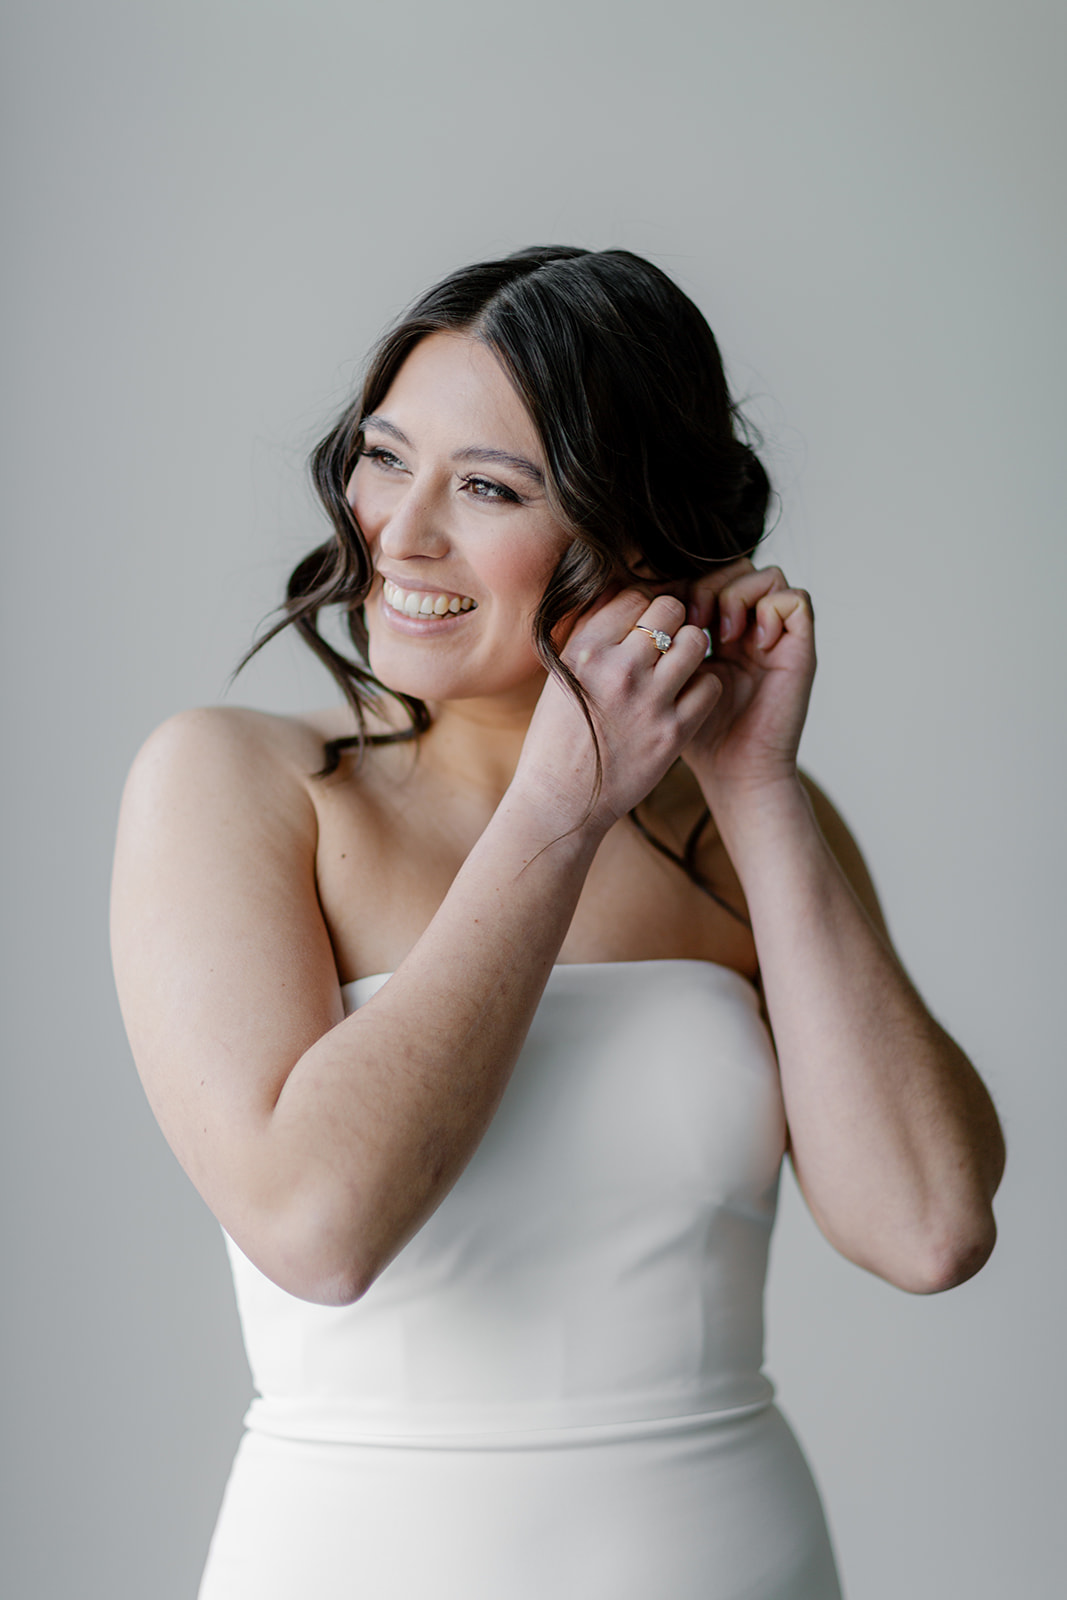 Gorgeous contemporary bride putting on earrings, wearing simple sleek wedding gown by Theia.